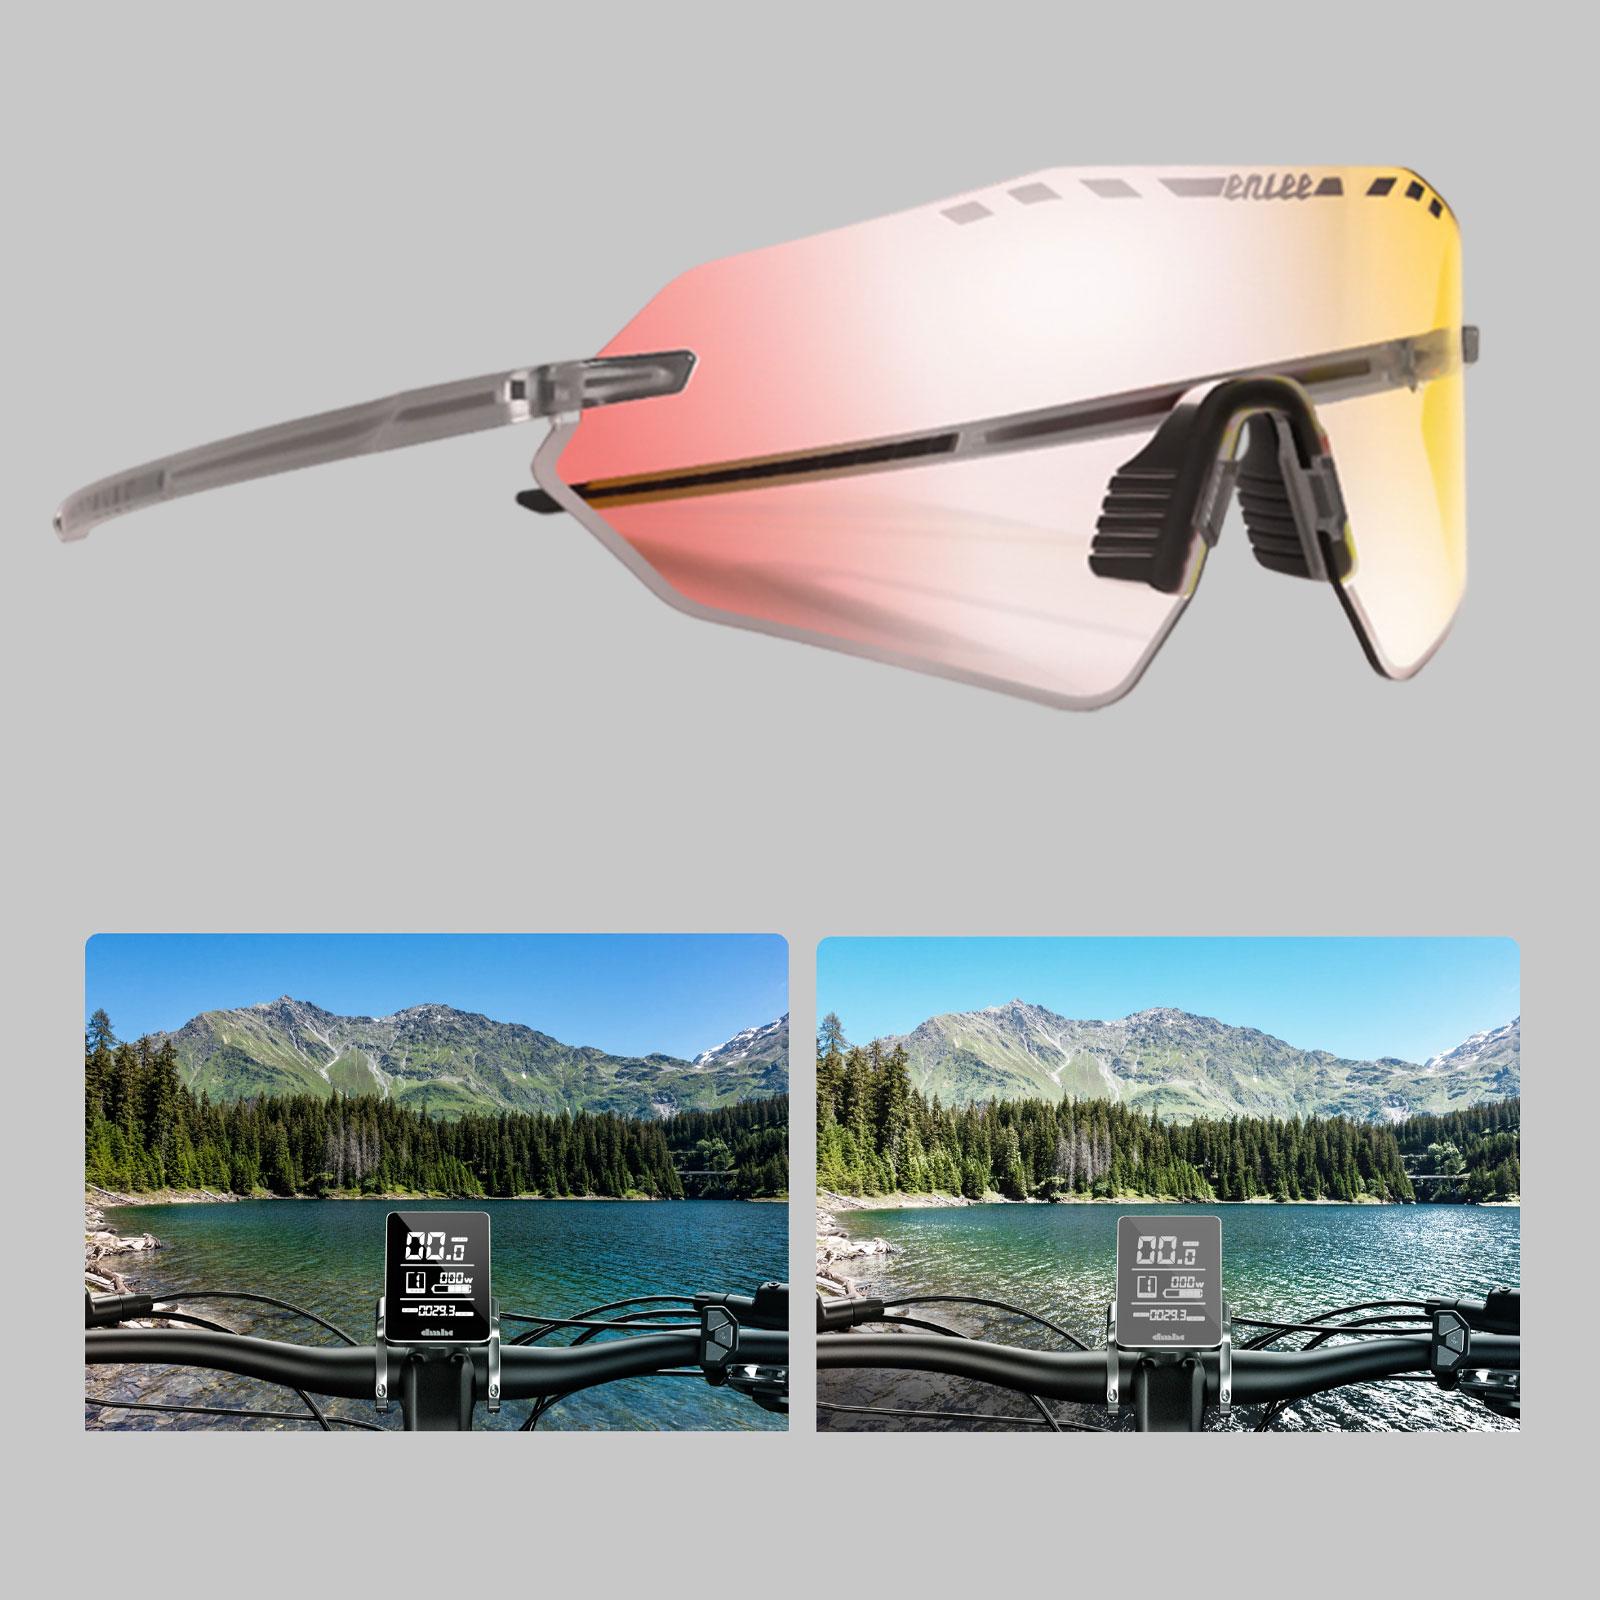 Frameless Photochromic Cycling Sunglasses Cycling Glasses Sturdy Outdoor Style A